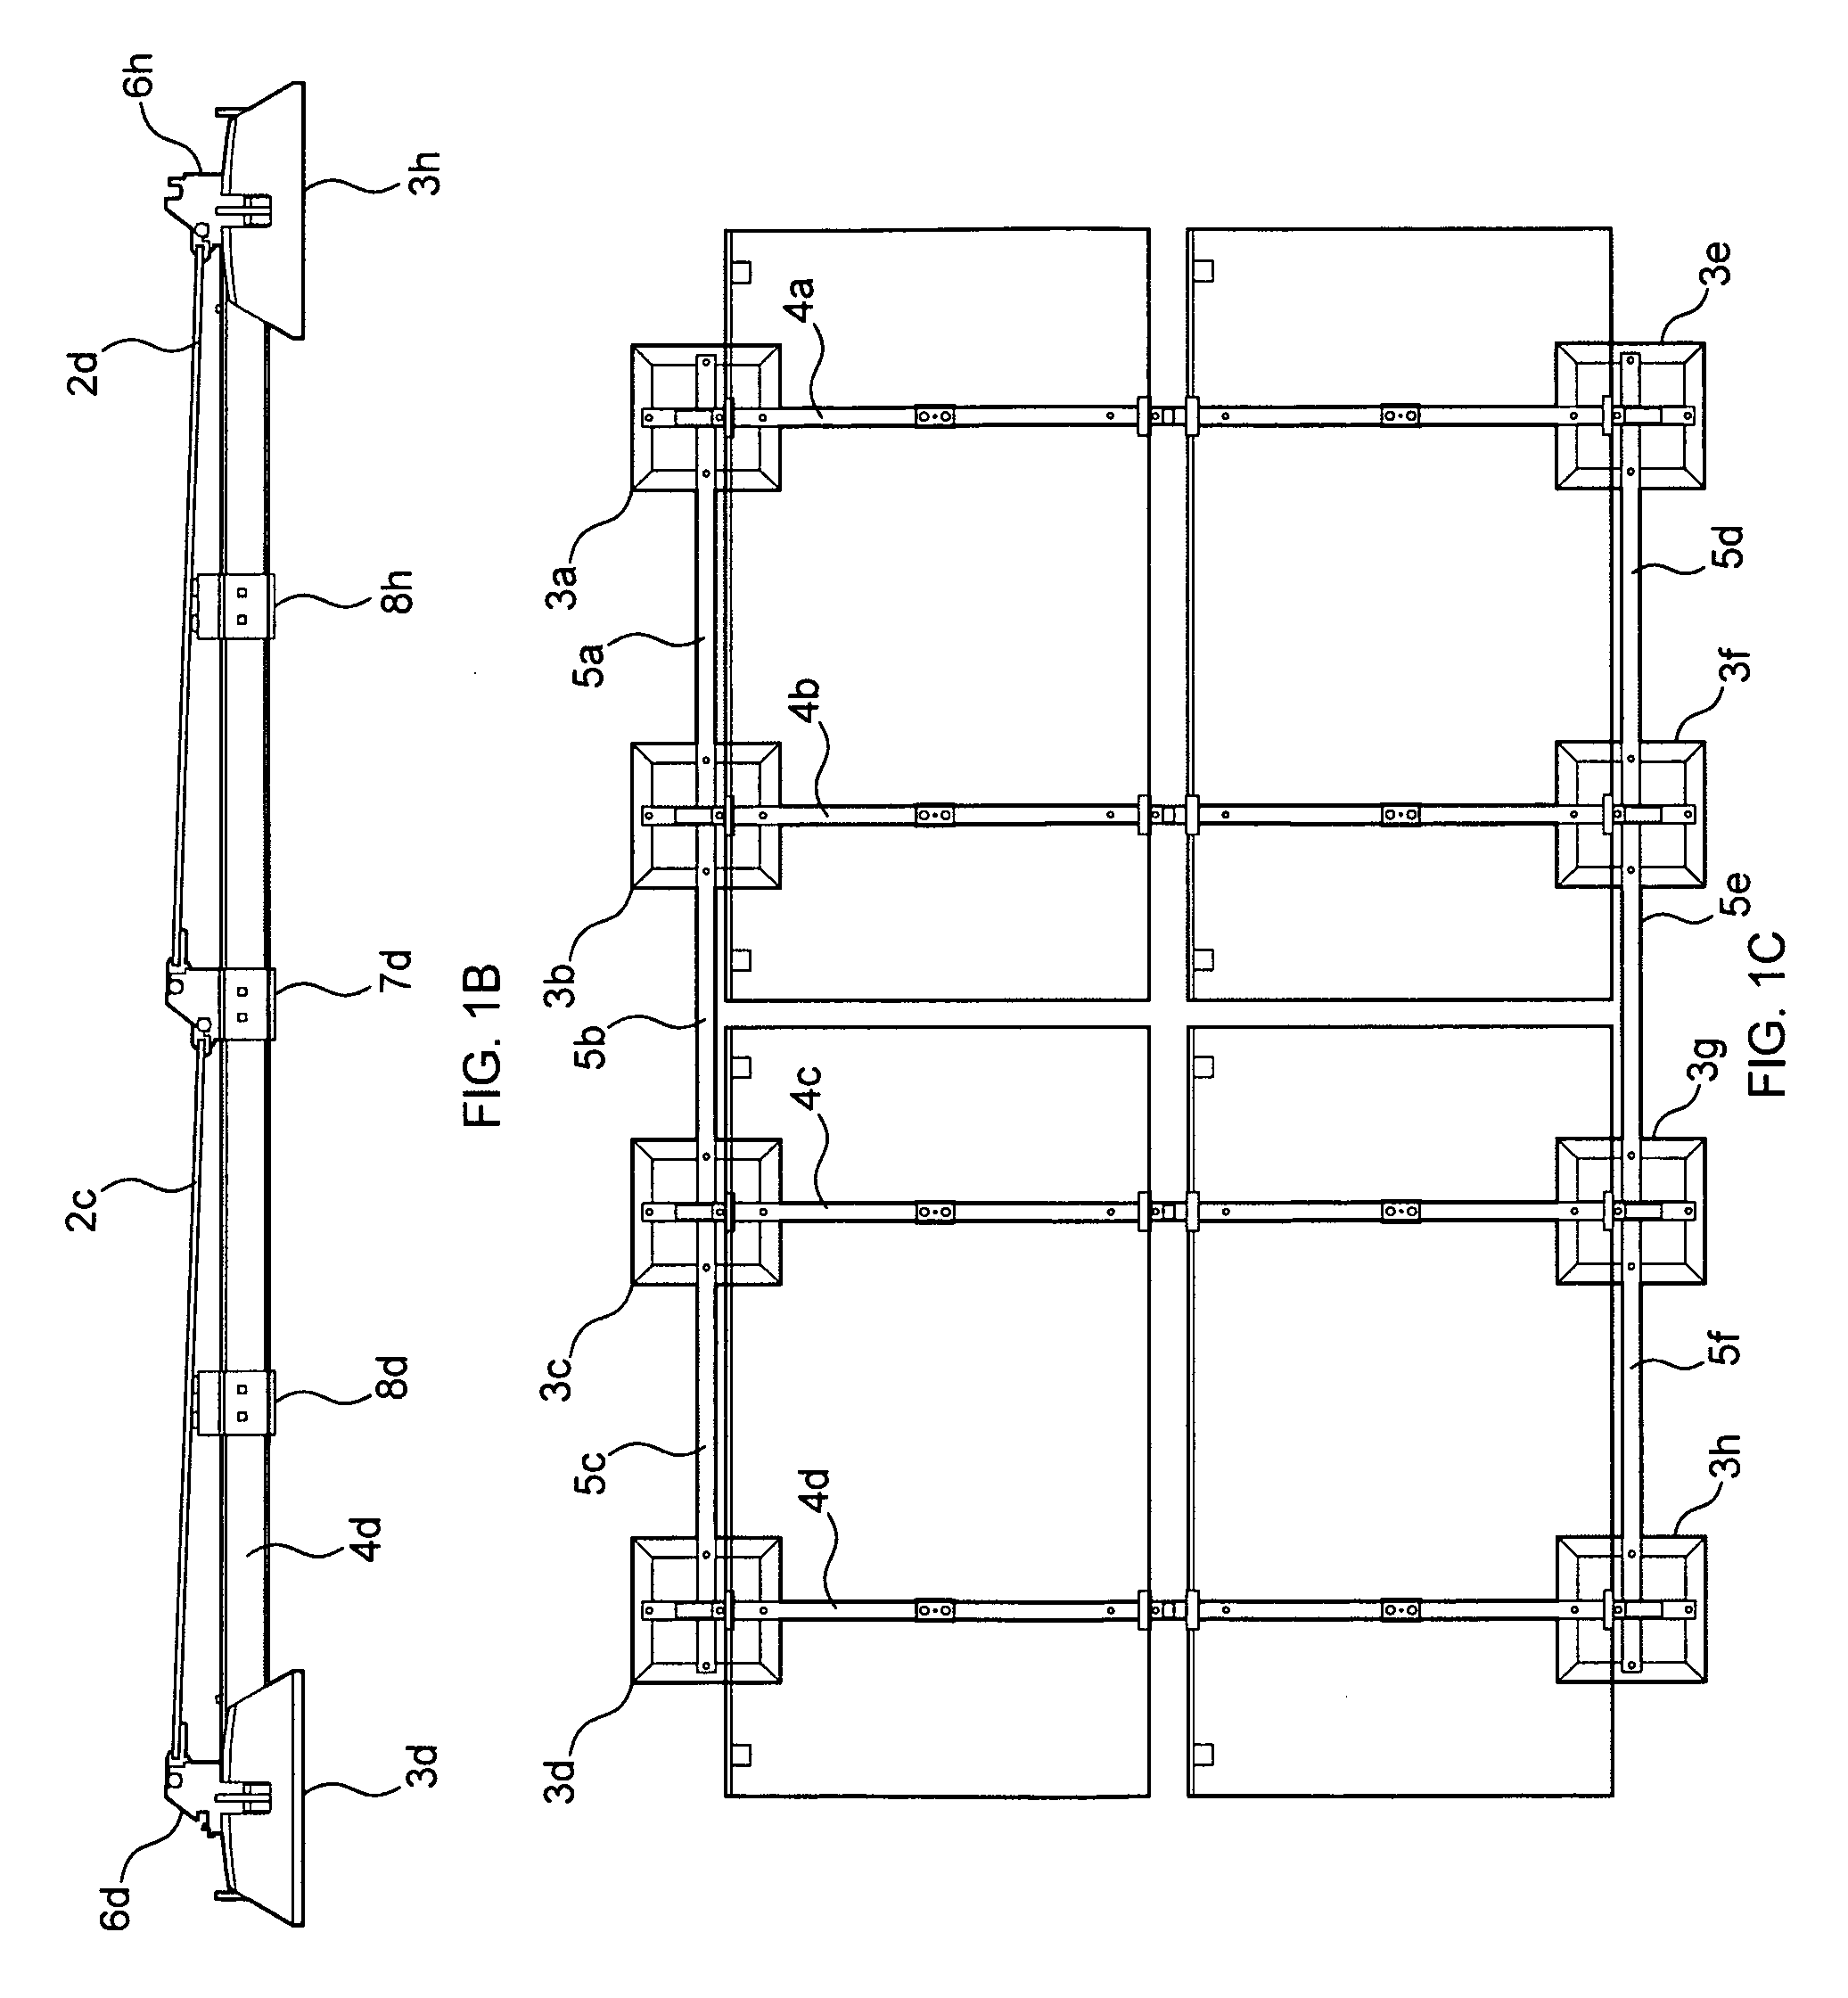 Photovoltaic module mounting system